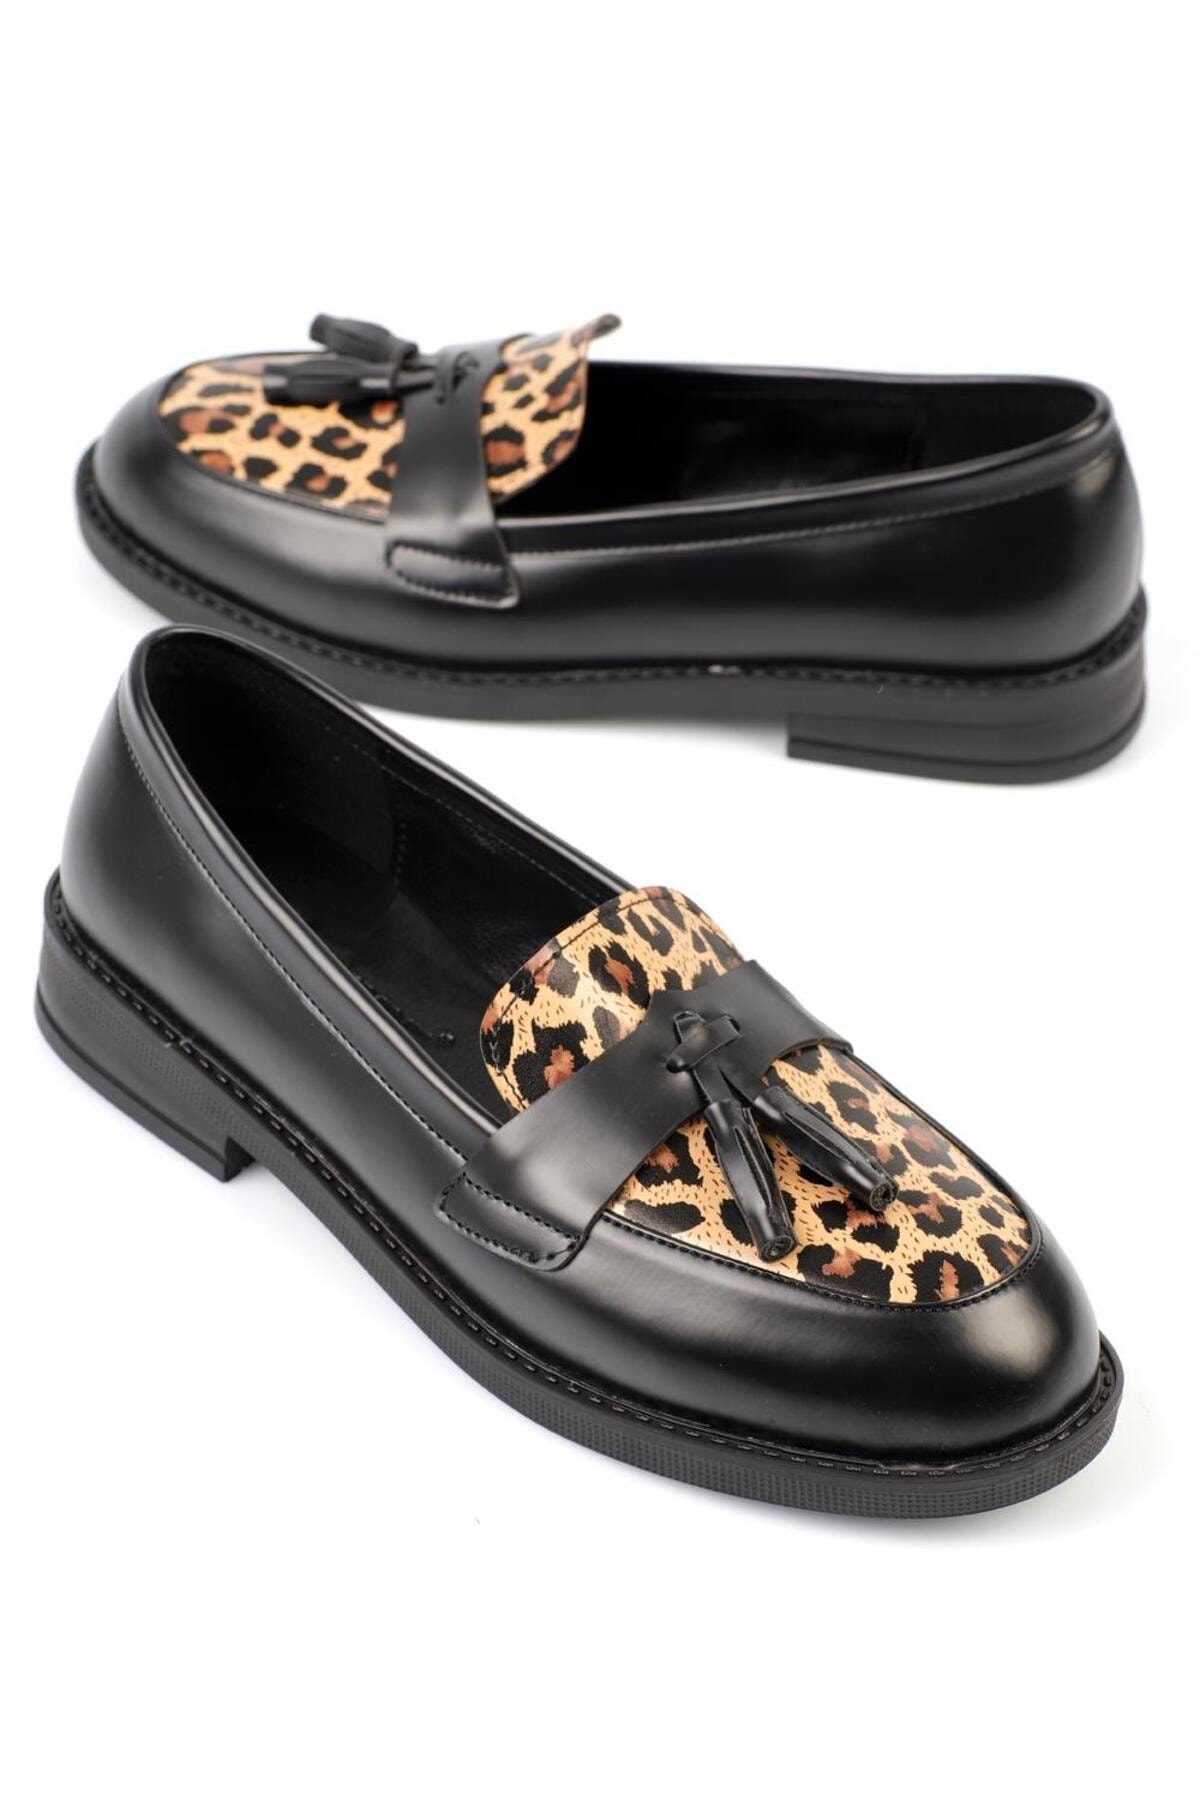 Levně Capone Outfitters Capone Women's Round Toe, Tasseled Loafers